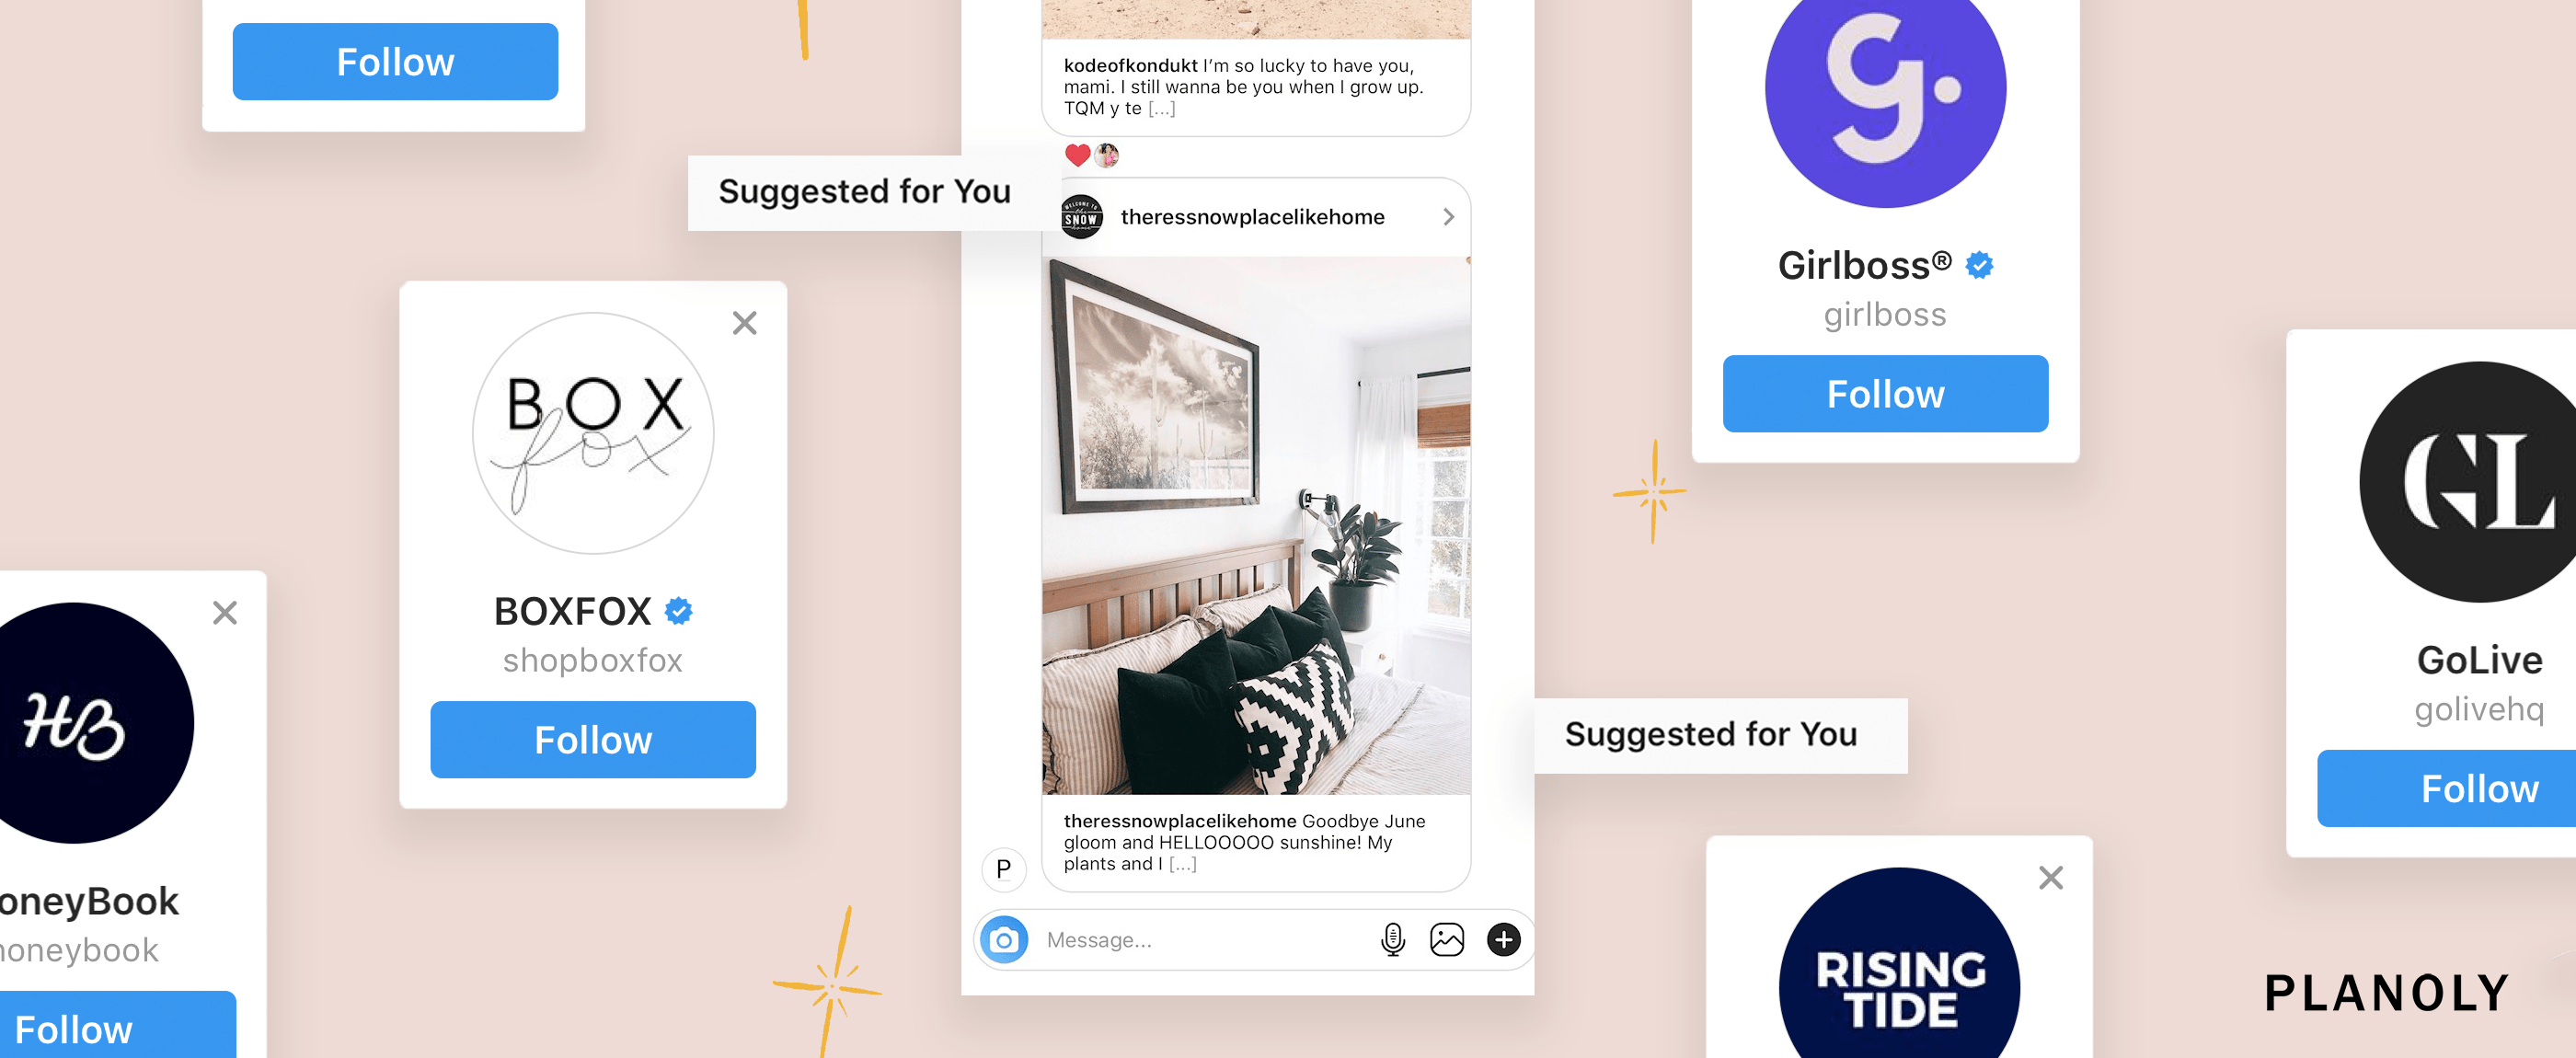 Instagram's New 'Suggestions for You' Feature